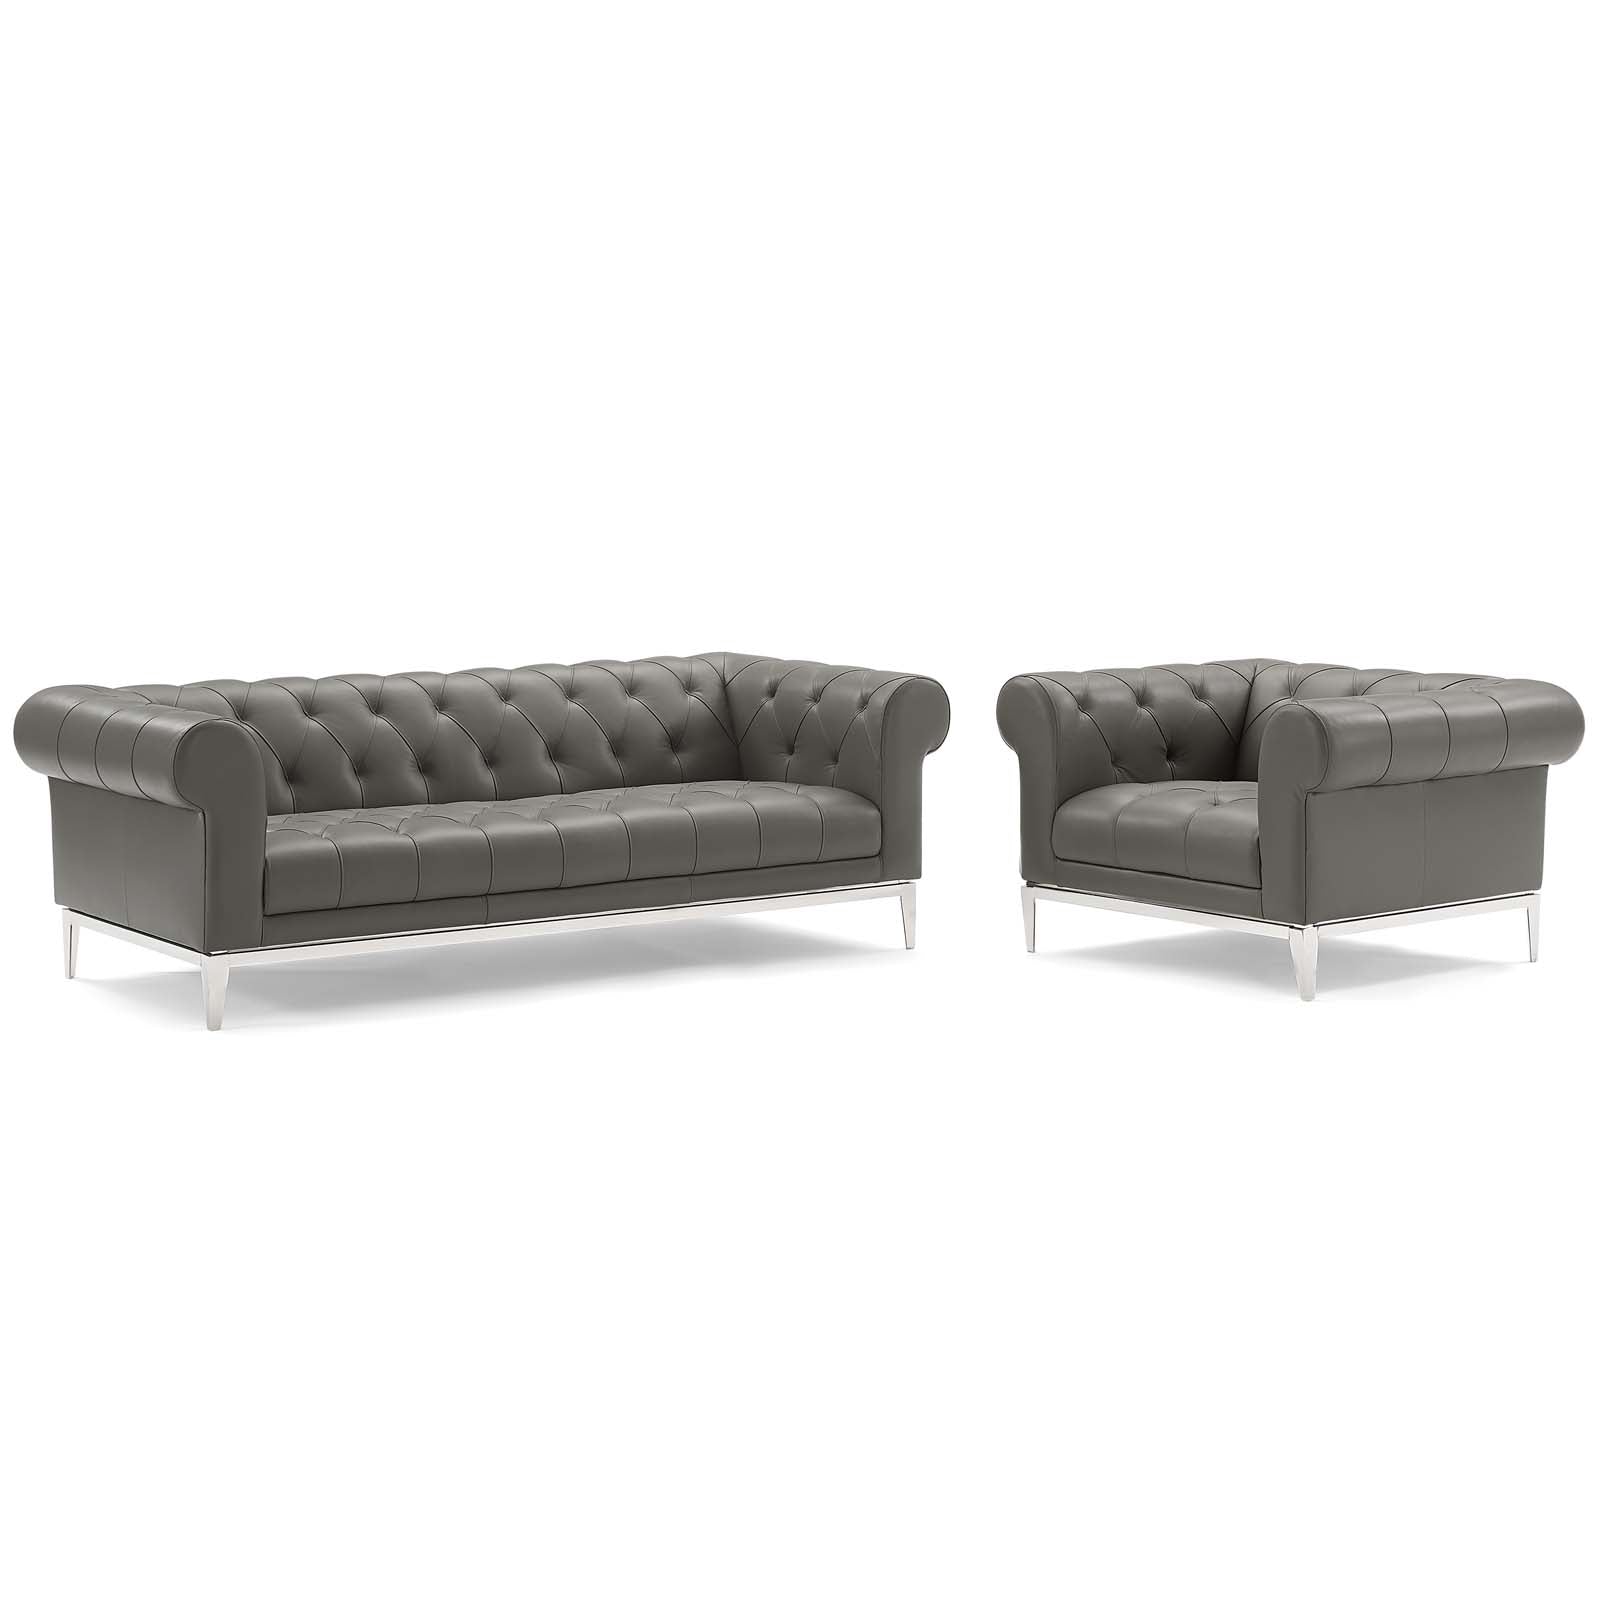 Modway Sofas & Couches - Idyll-Tufted-Upholstered-Leather-Sofa-and-Armchair-Set-Gray